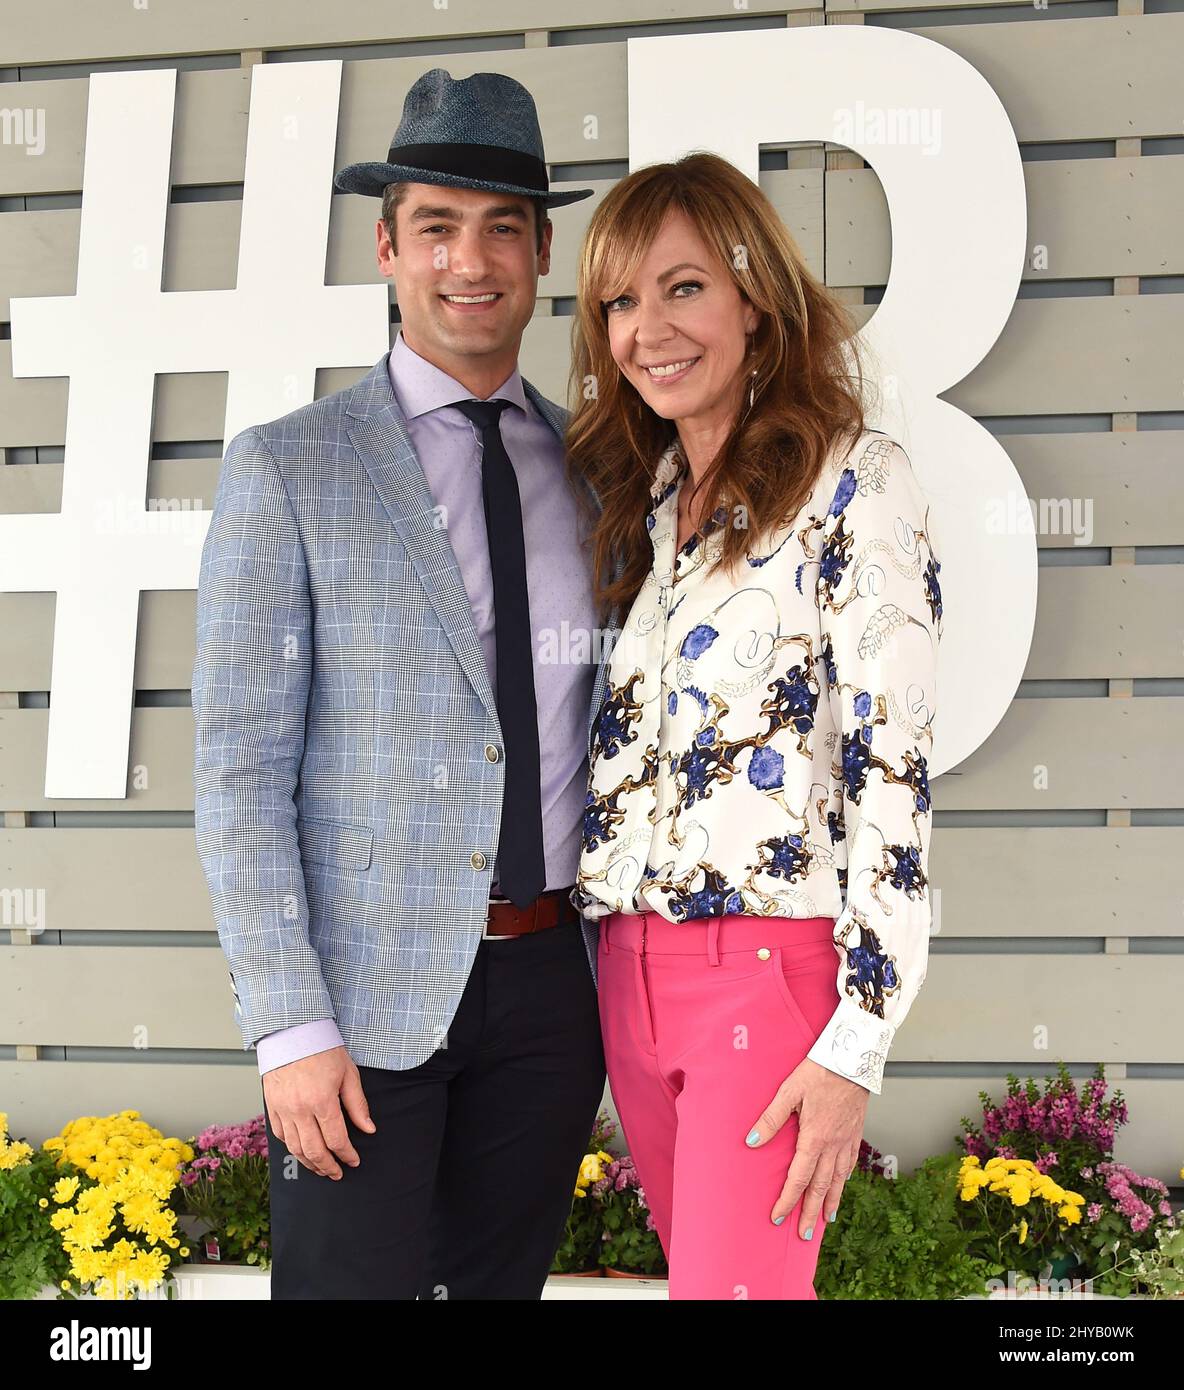 Allison Janney and Philip Joncas attends the 33rd running of the Breeders'Cup World Championships, one of Thoroughbred racing's most prestigious international events held at Santa Anita Park Stock Photo